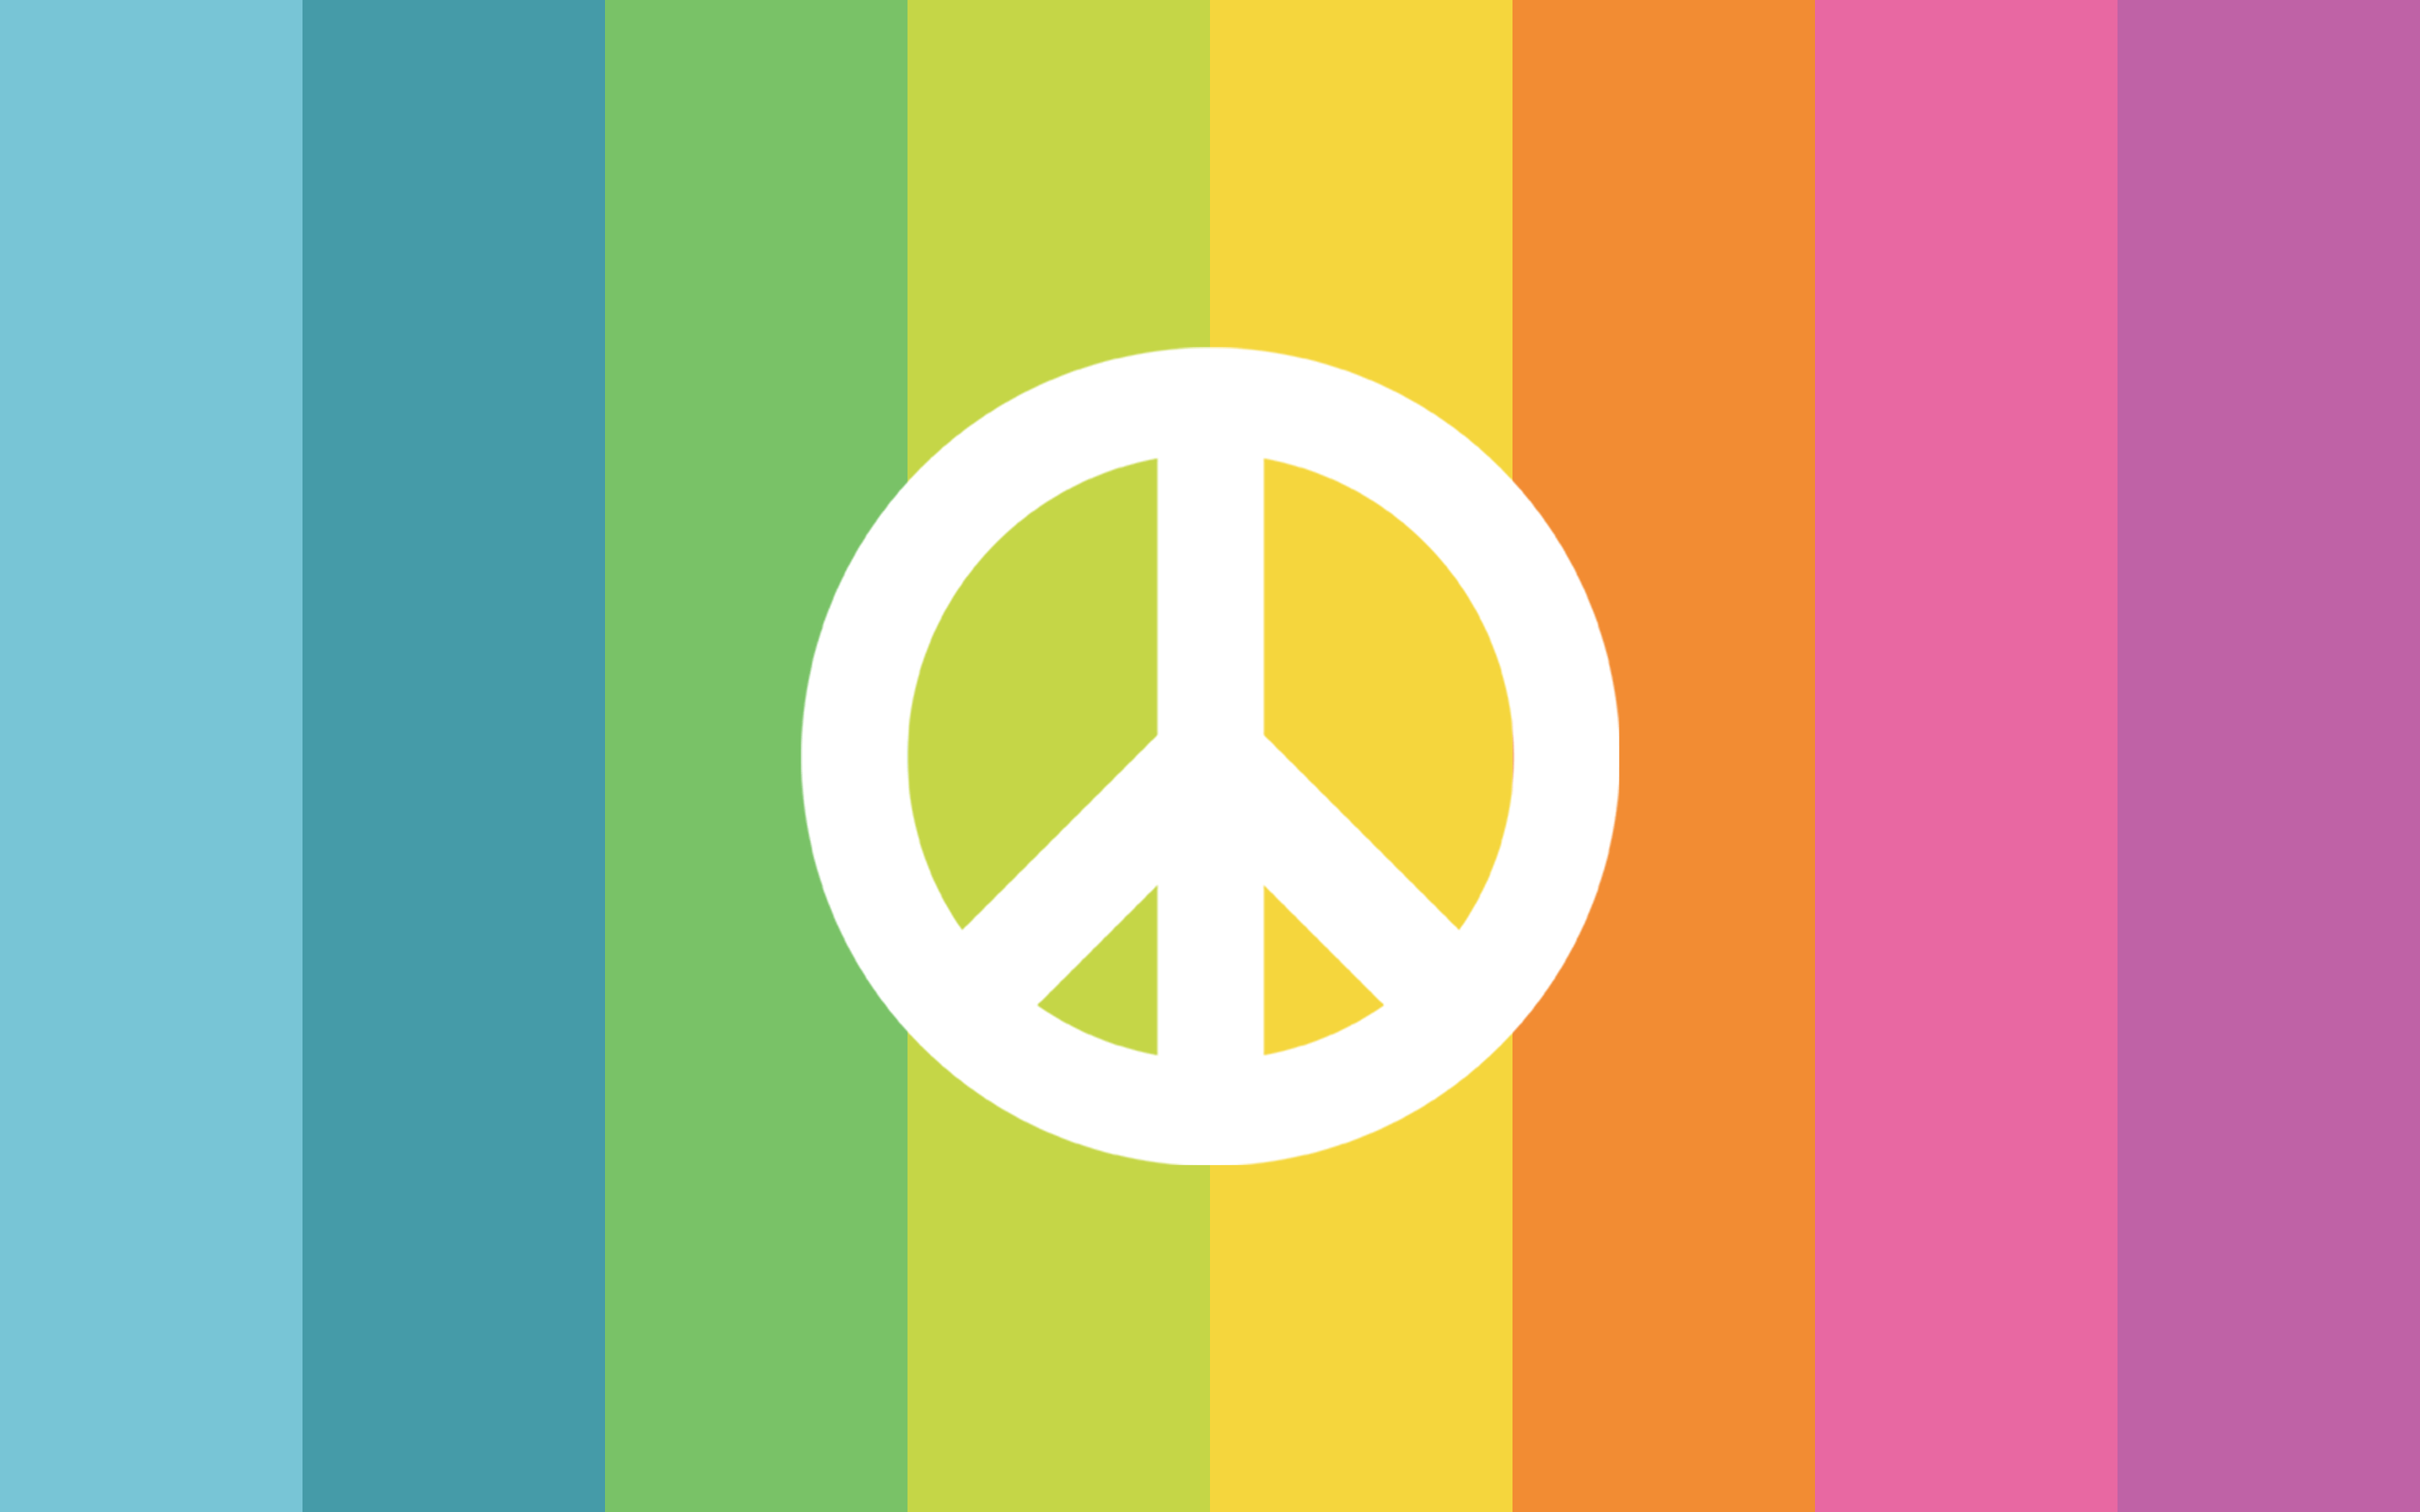 Wallpaper For > Neon Colored Peace Sign Wallpaper